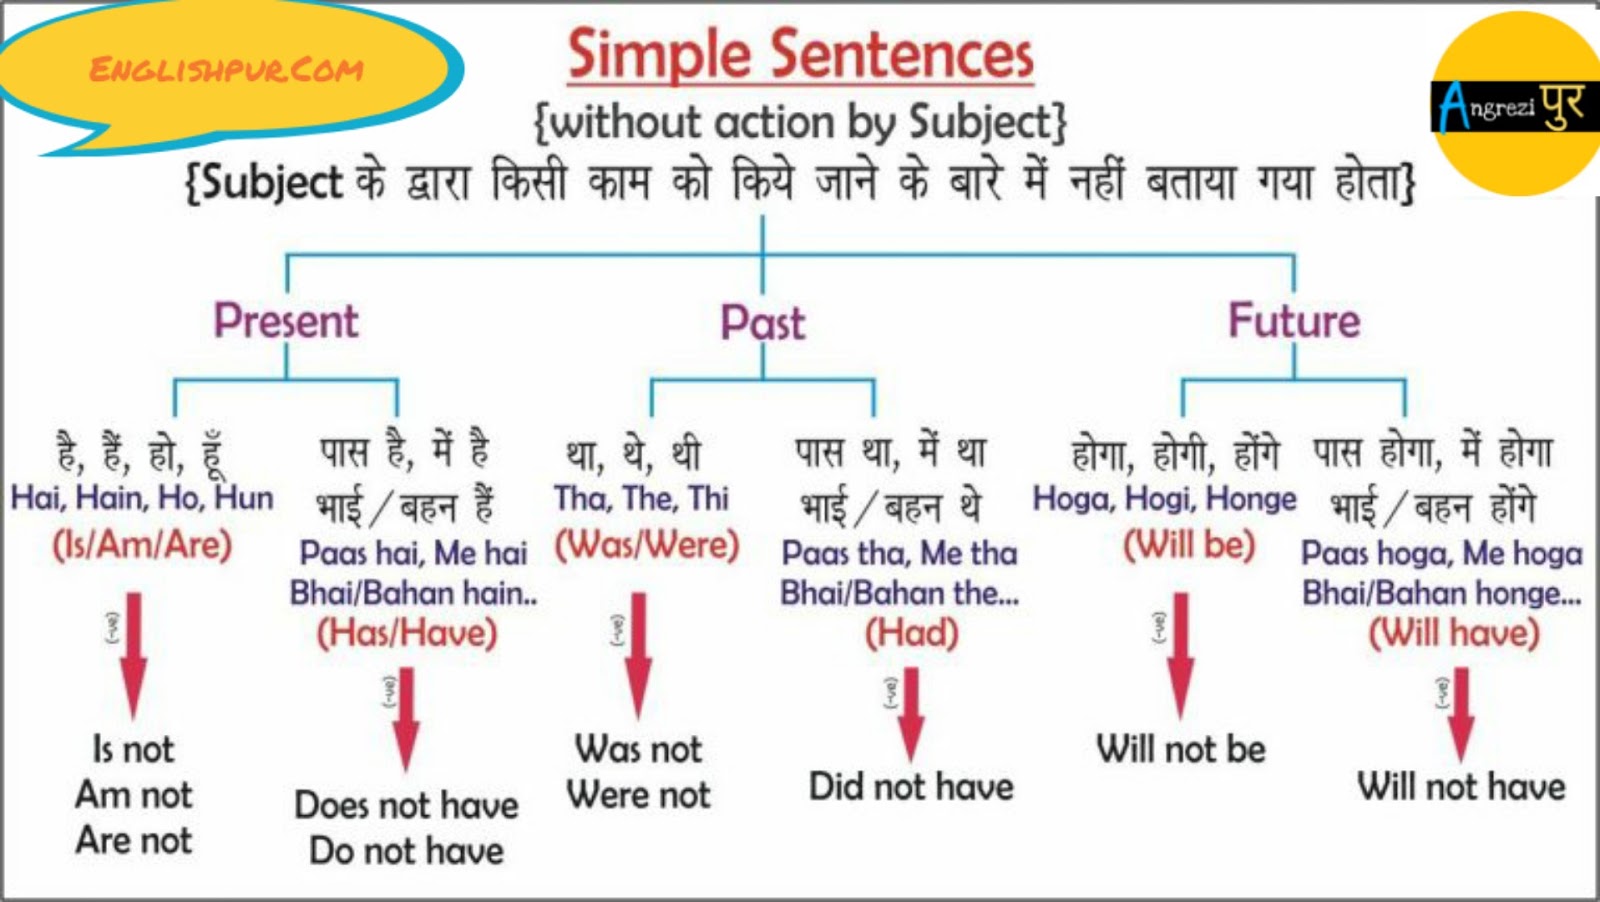 English Tenses Table With Examples In Hindi | Brokeasshome.com